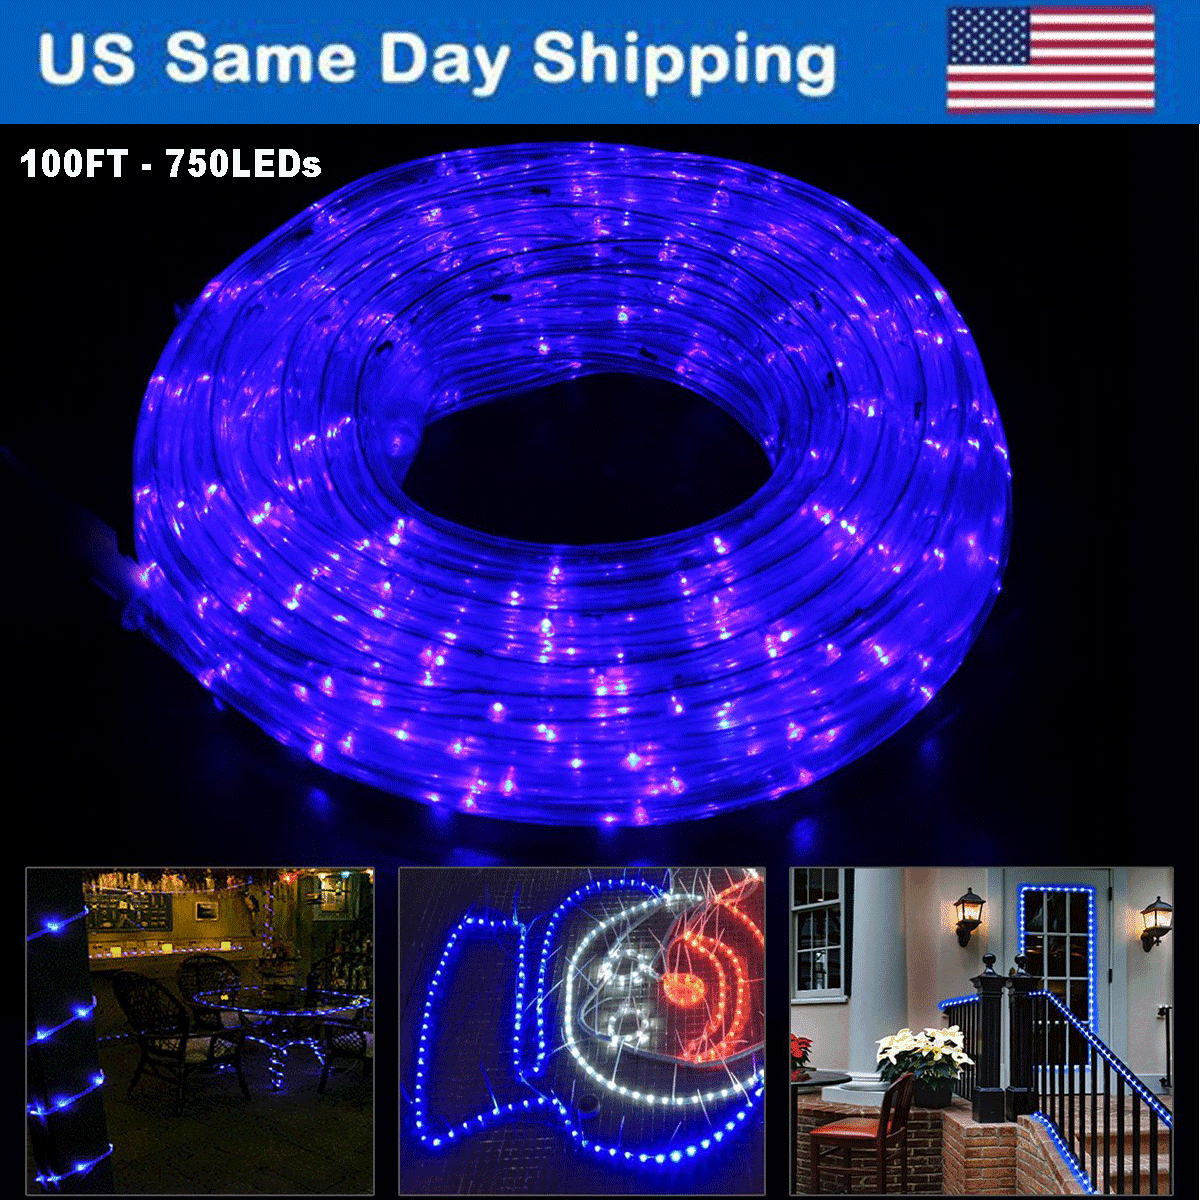 Details about   LED String Lights Rope Fairy Waterproof Remote Control Xmas Garden lightings US 